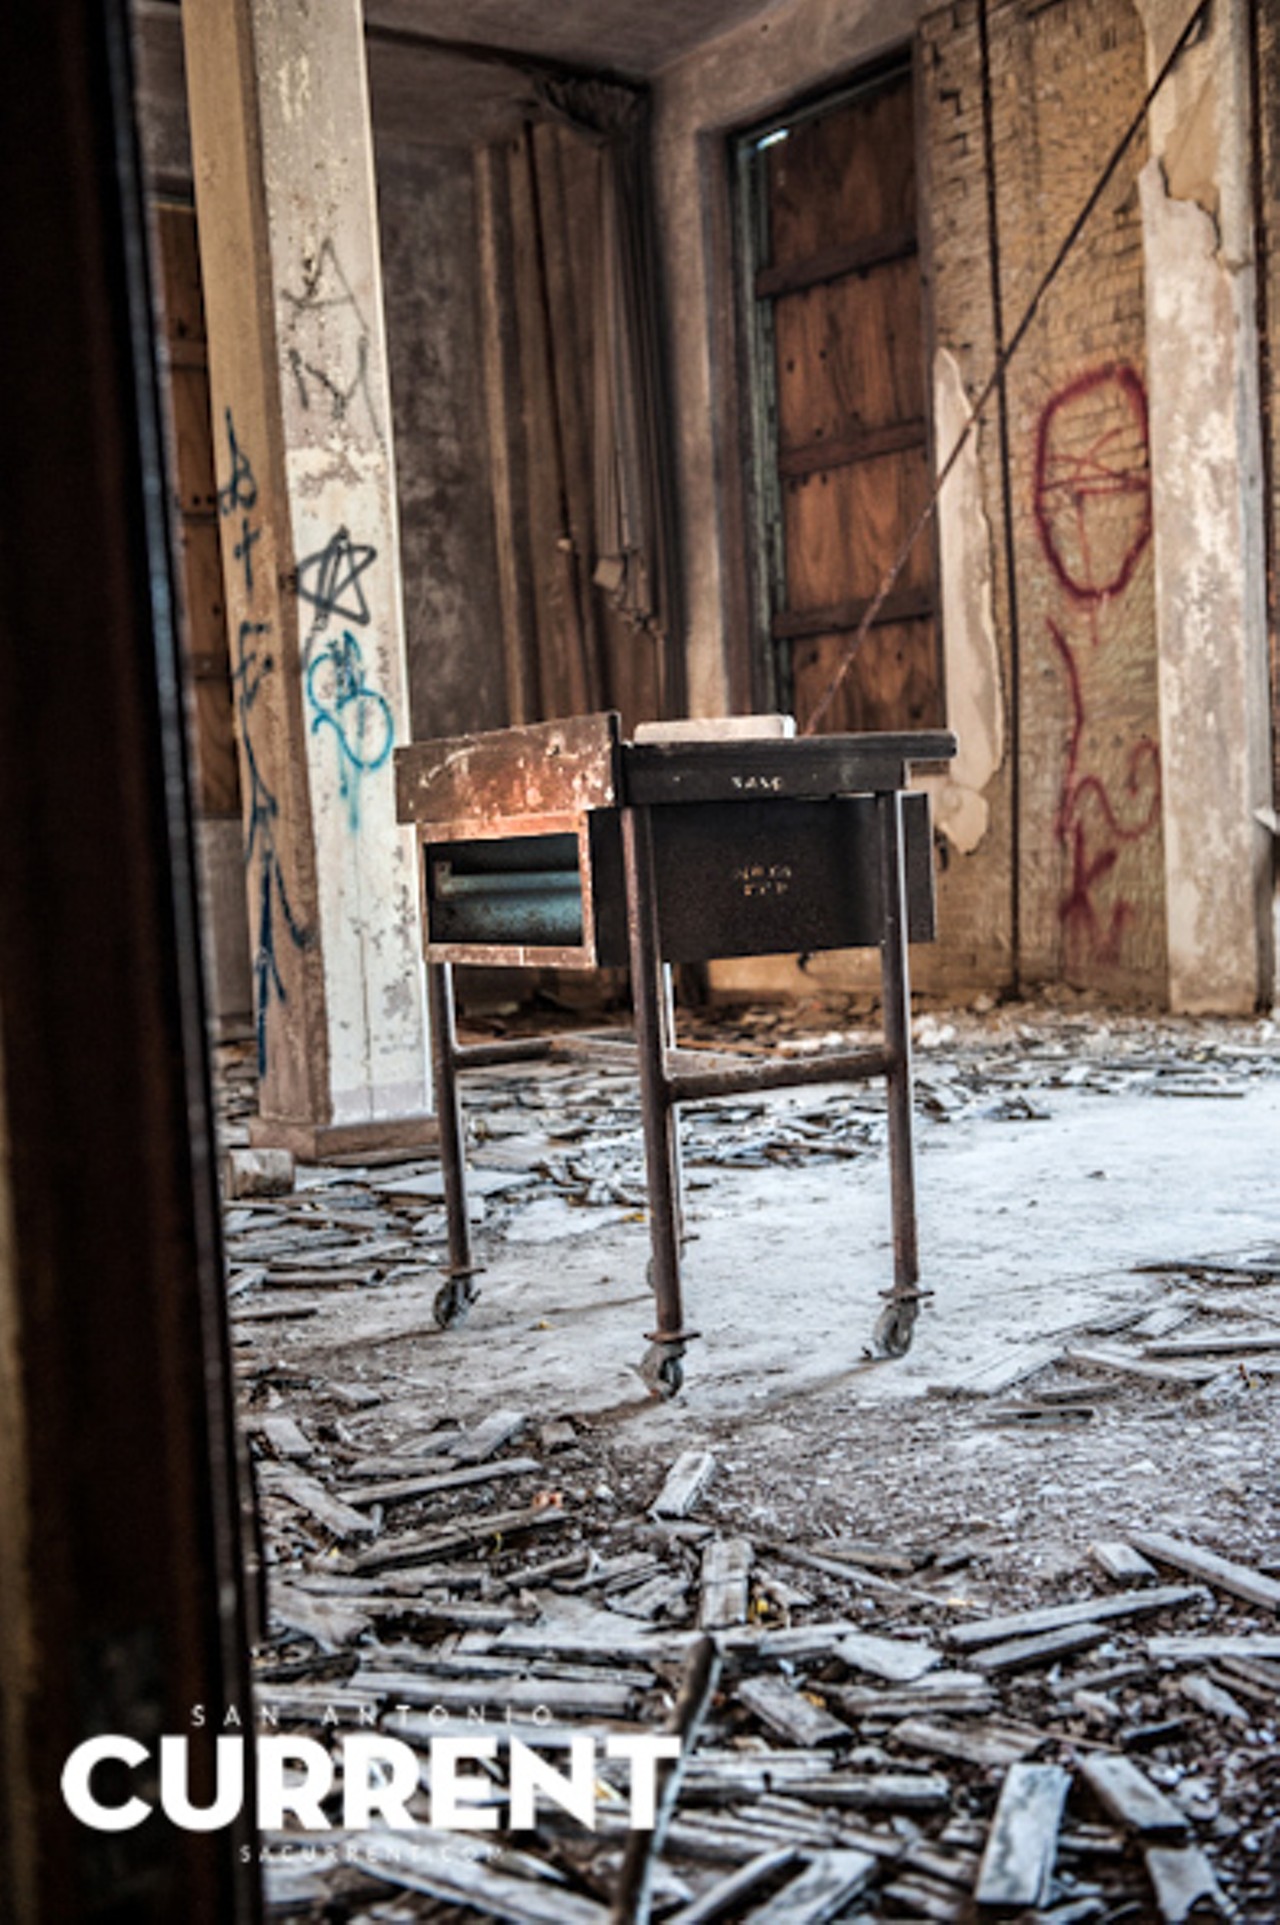 Photos from the Abandoned SAT State Asylum